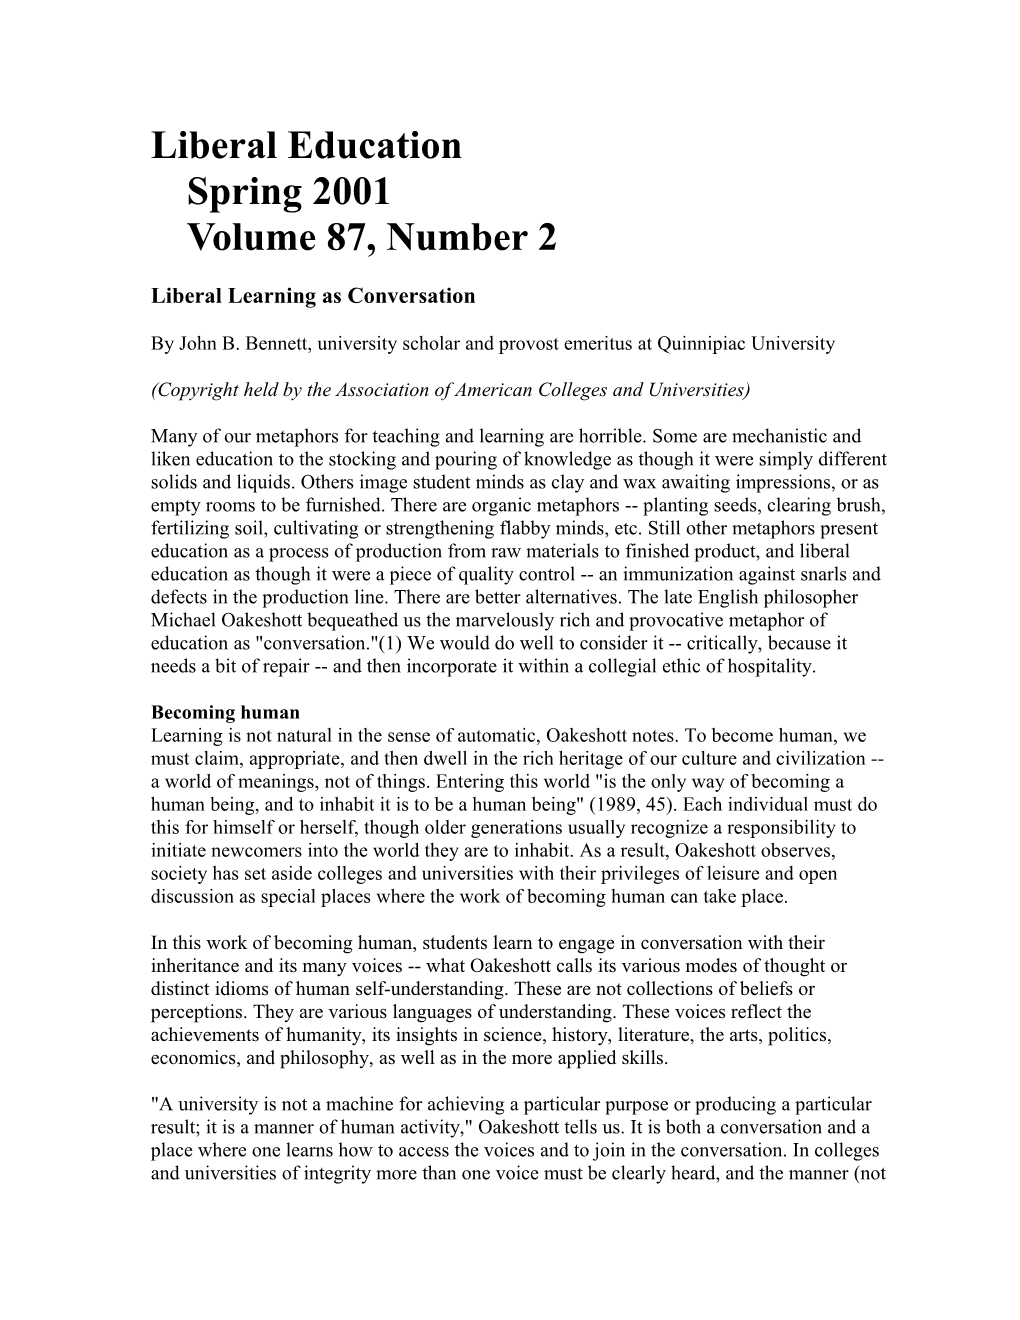 Liberal Educationspring 2001Volume 87, Number 2 Liberal Learning As Conversation by John